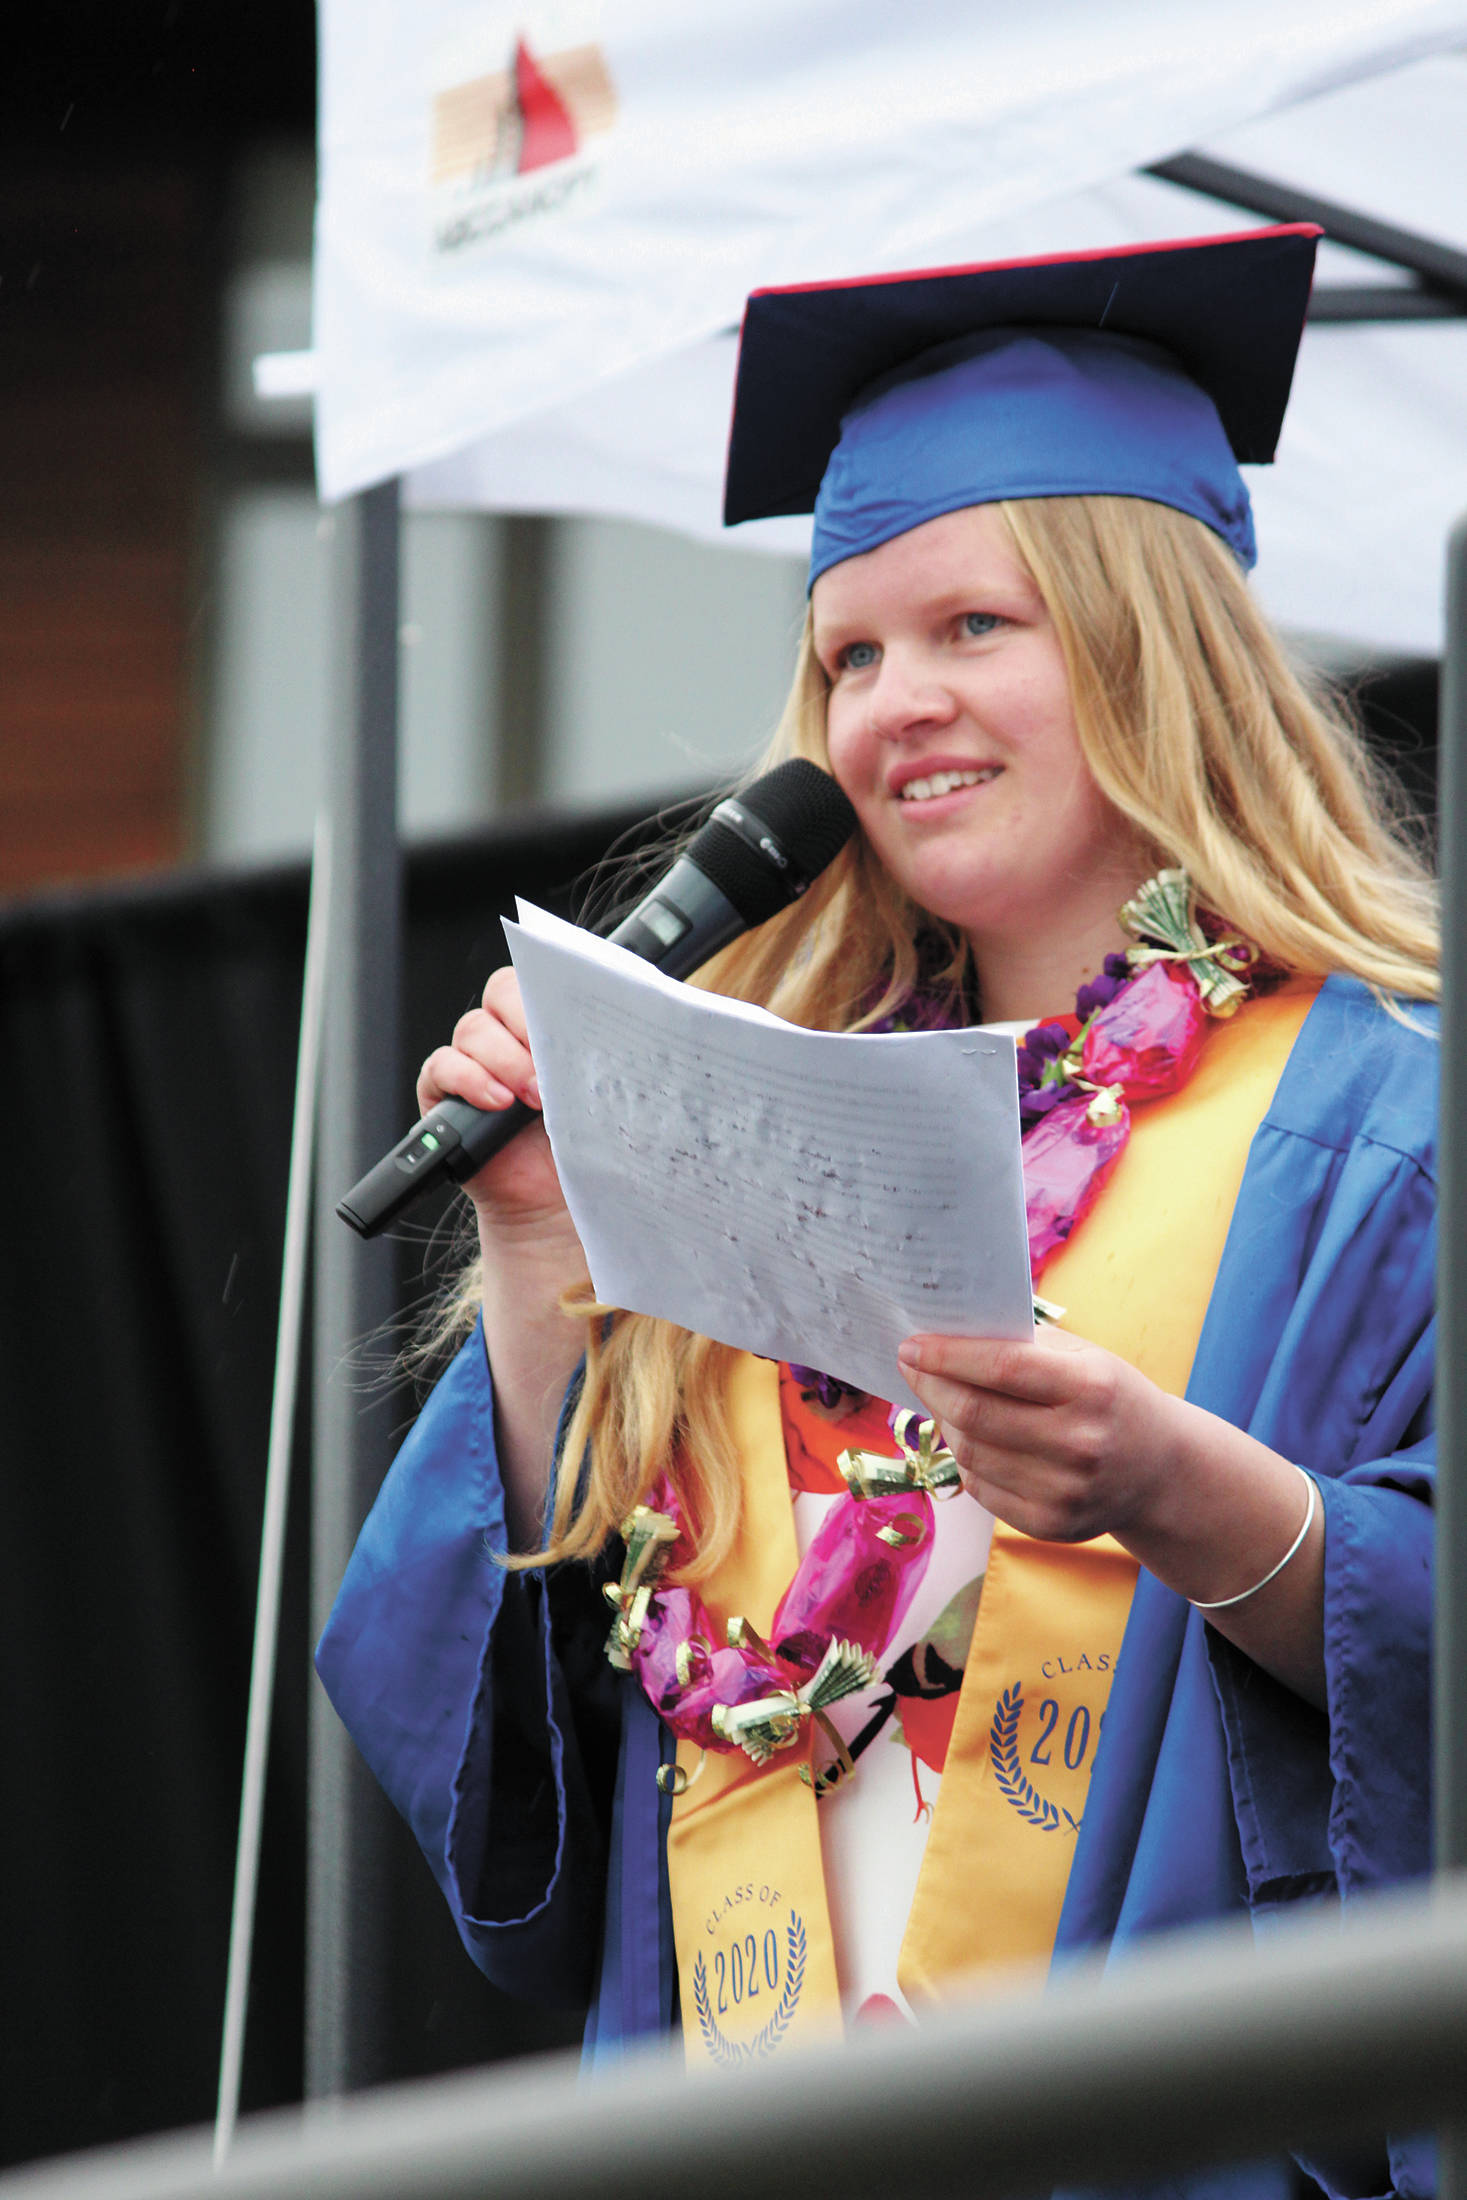 Salutatorian Daisy Kettle speaks to her fellow graduates during Homer High School’s commencement ceremony, held outside the school Monday, May 18, 2020 in Homer, Alaska. (Photo by Megan Pacer/Homer News)